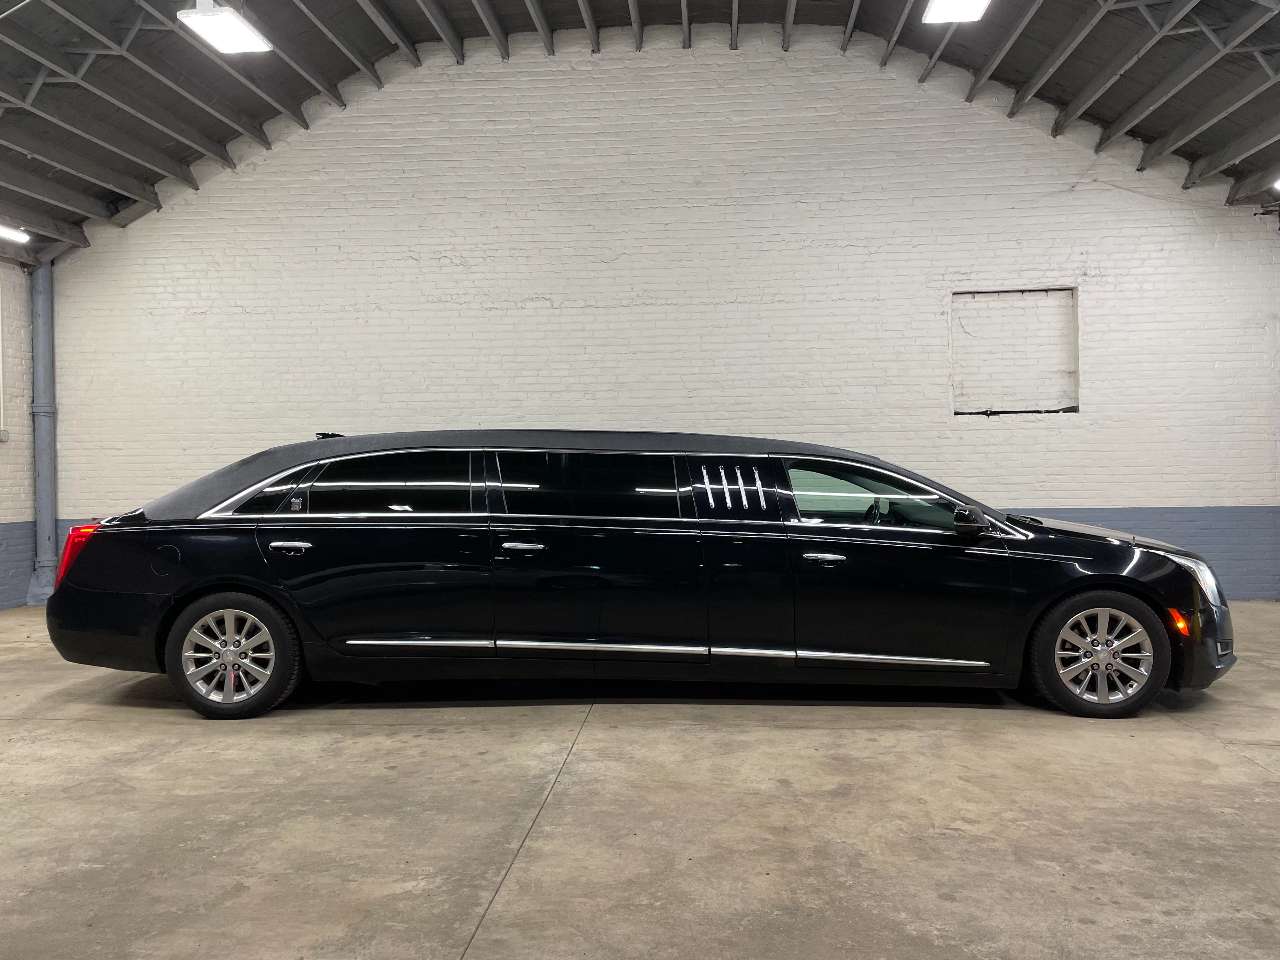 2017 Cadillac Armbruster Stageway 70   Stretch Limousine 1698348961273